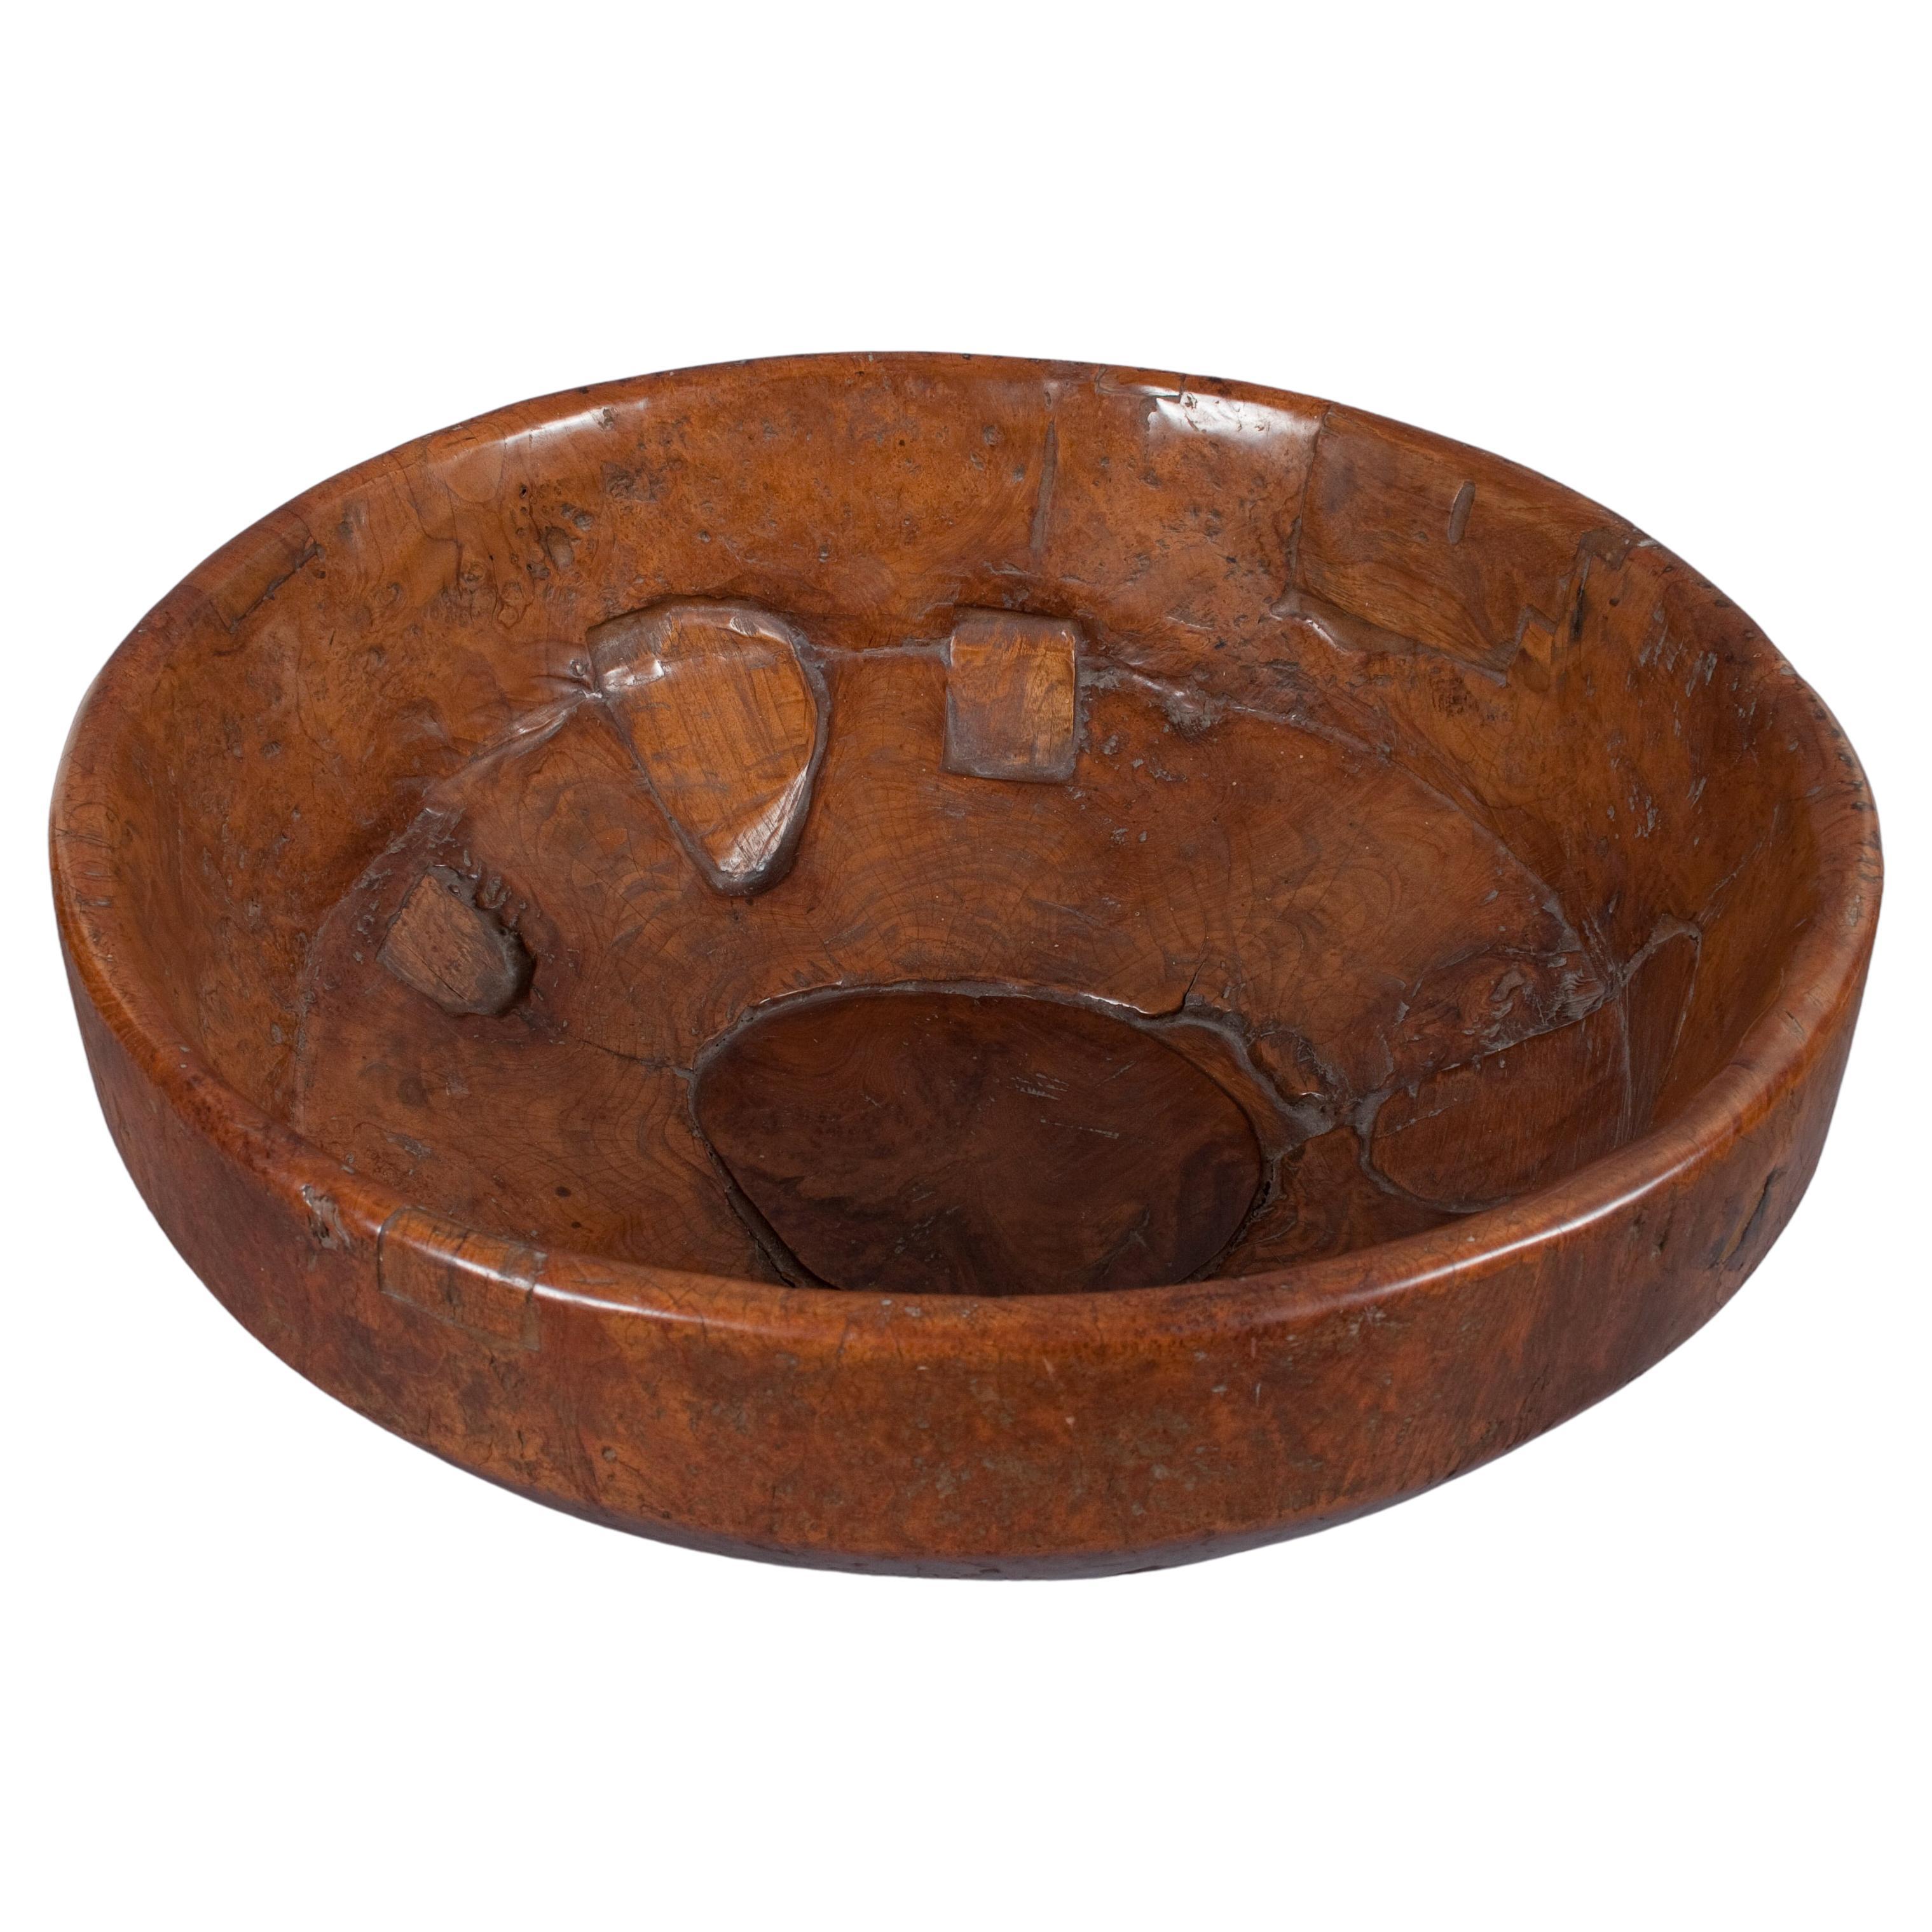 A beautiful bowl, originally a musical frame drum called Terbang, which was used in ecstatic devotional music. The drum was hewn from a single piece of teak burl wood, one of the rarest and most water resistant woods in the world. Repairs and